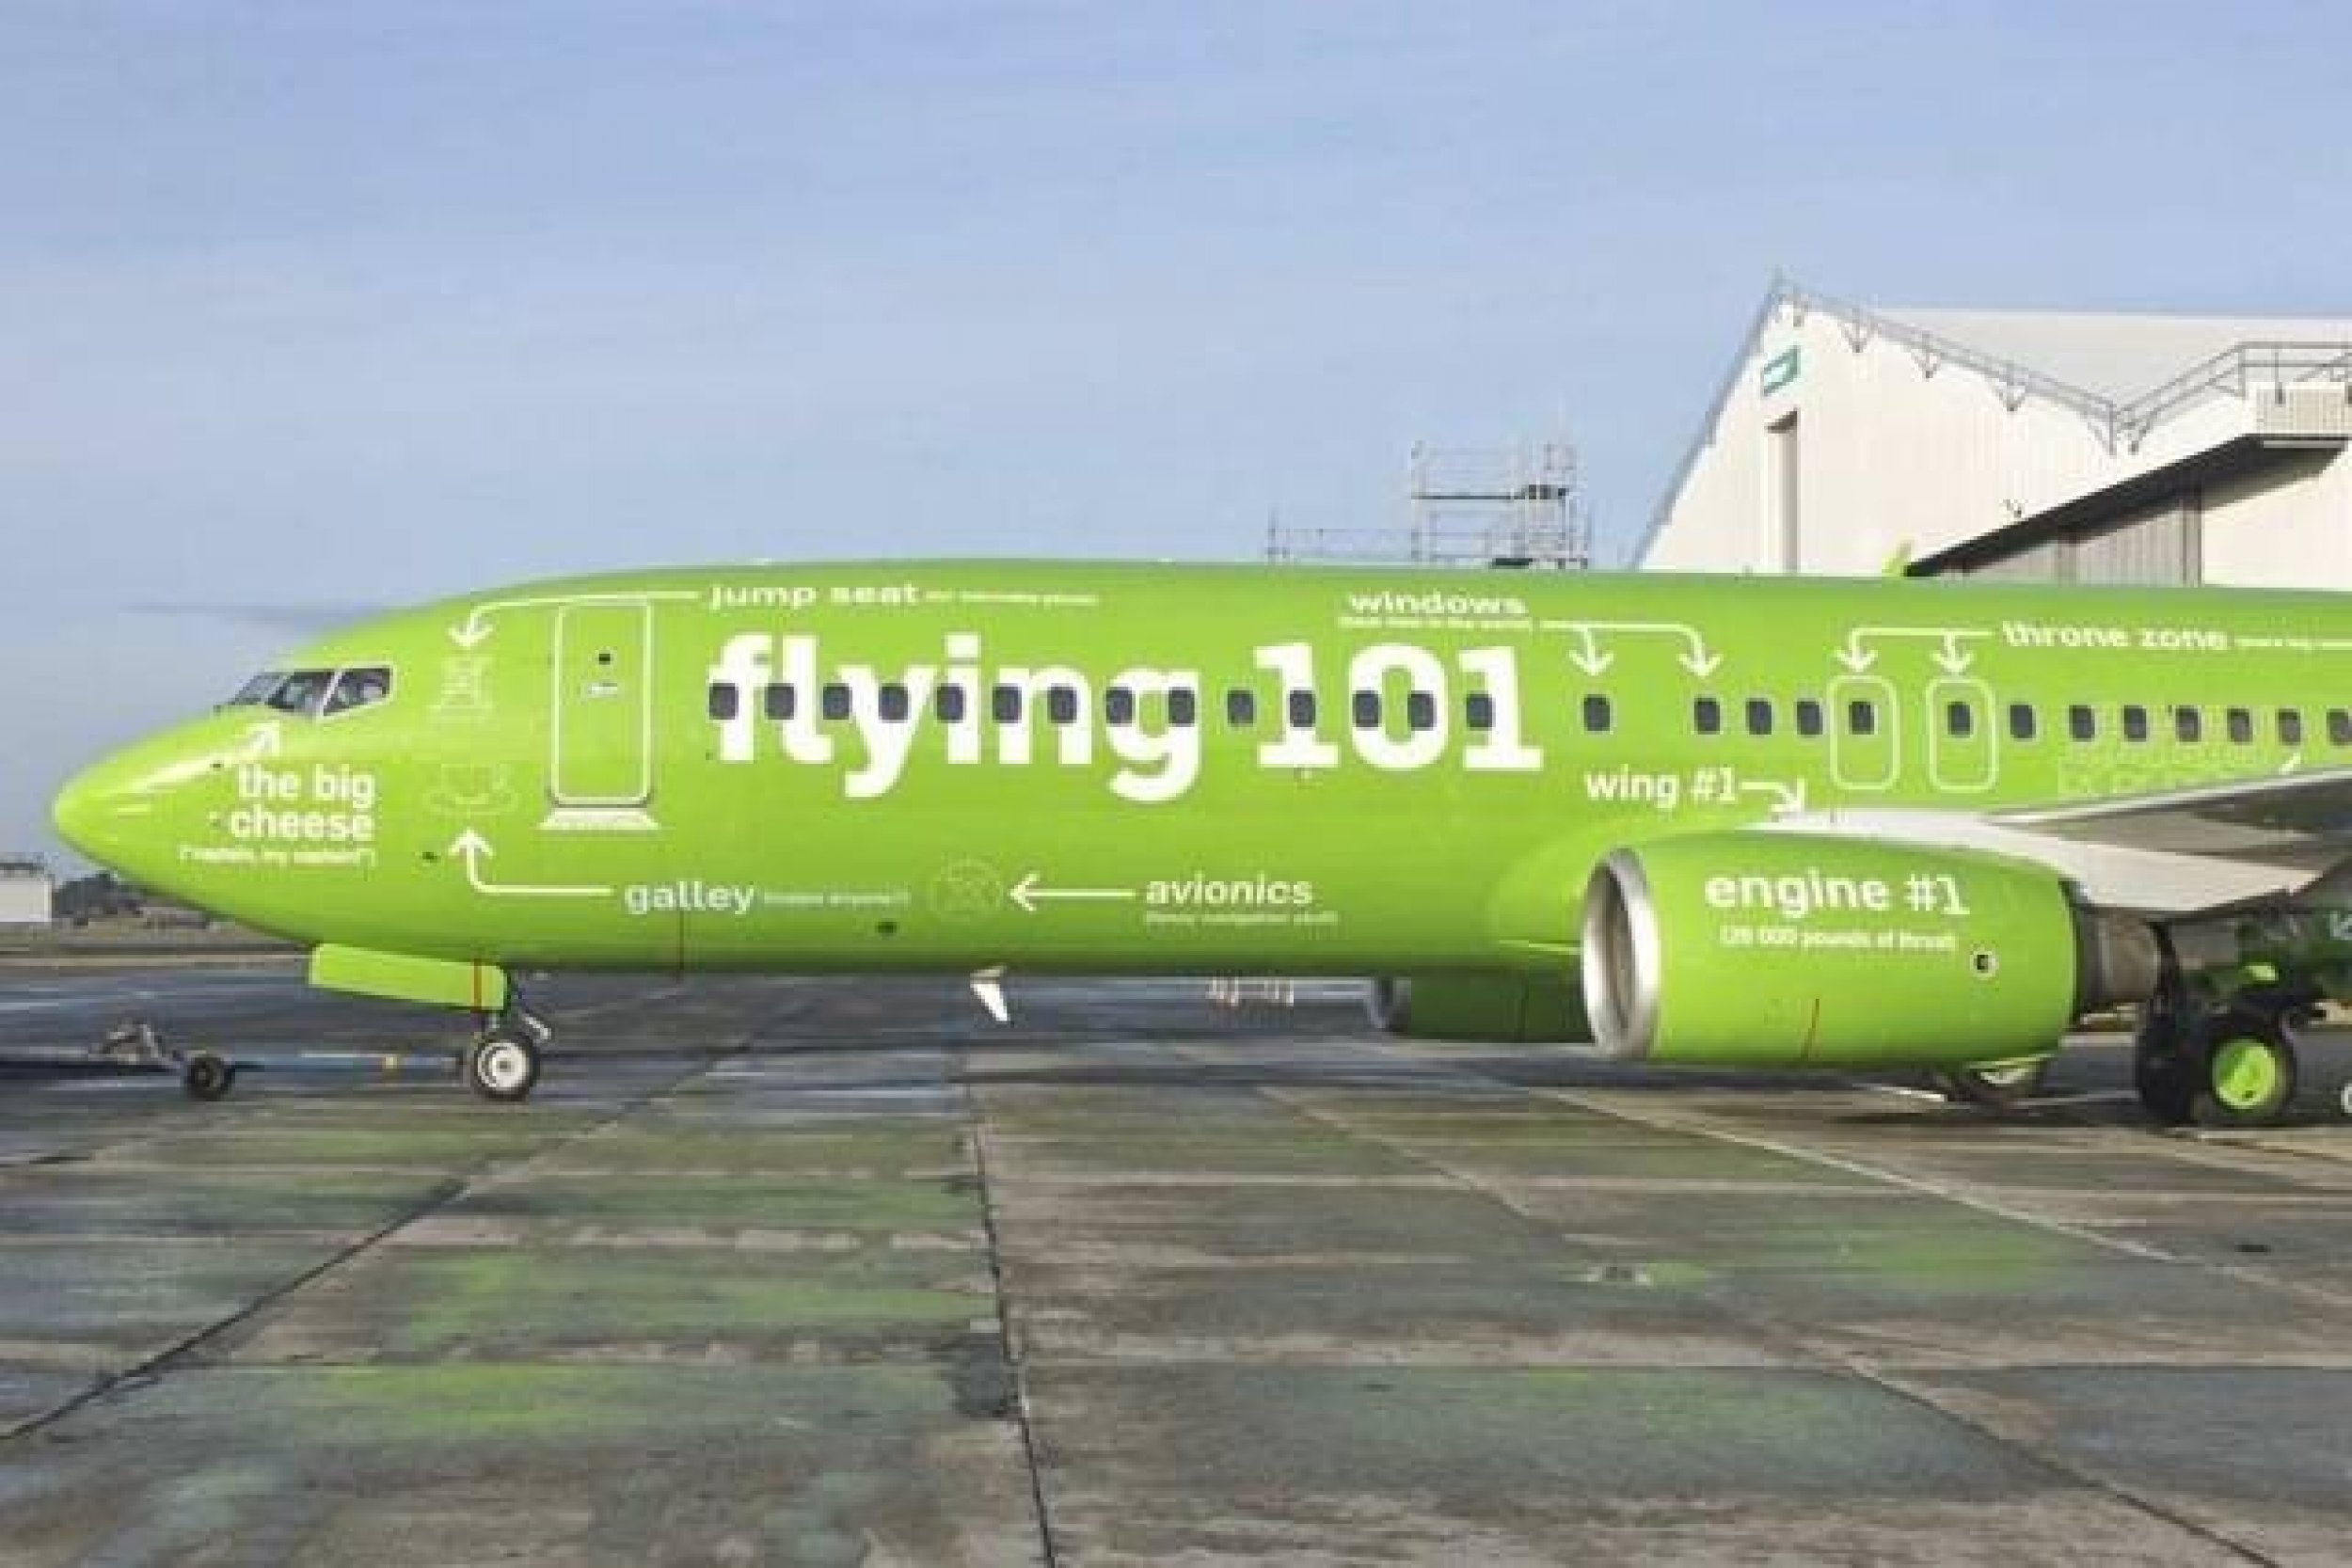 In case you didnt know the different parts of an airplane, Kulula Airlines has marked its own jet to tell you what everything is. Here is the left side of the plane, which shows the locations of the jump seat and the avionics, and to be funny, Kulula als